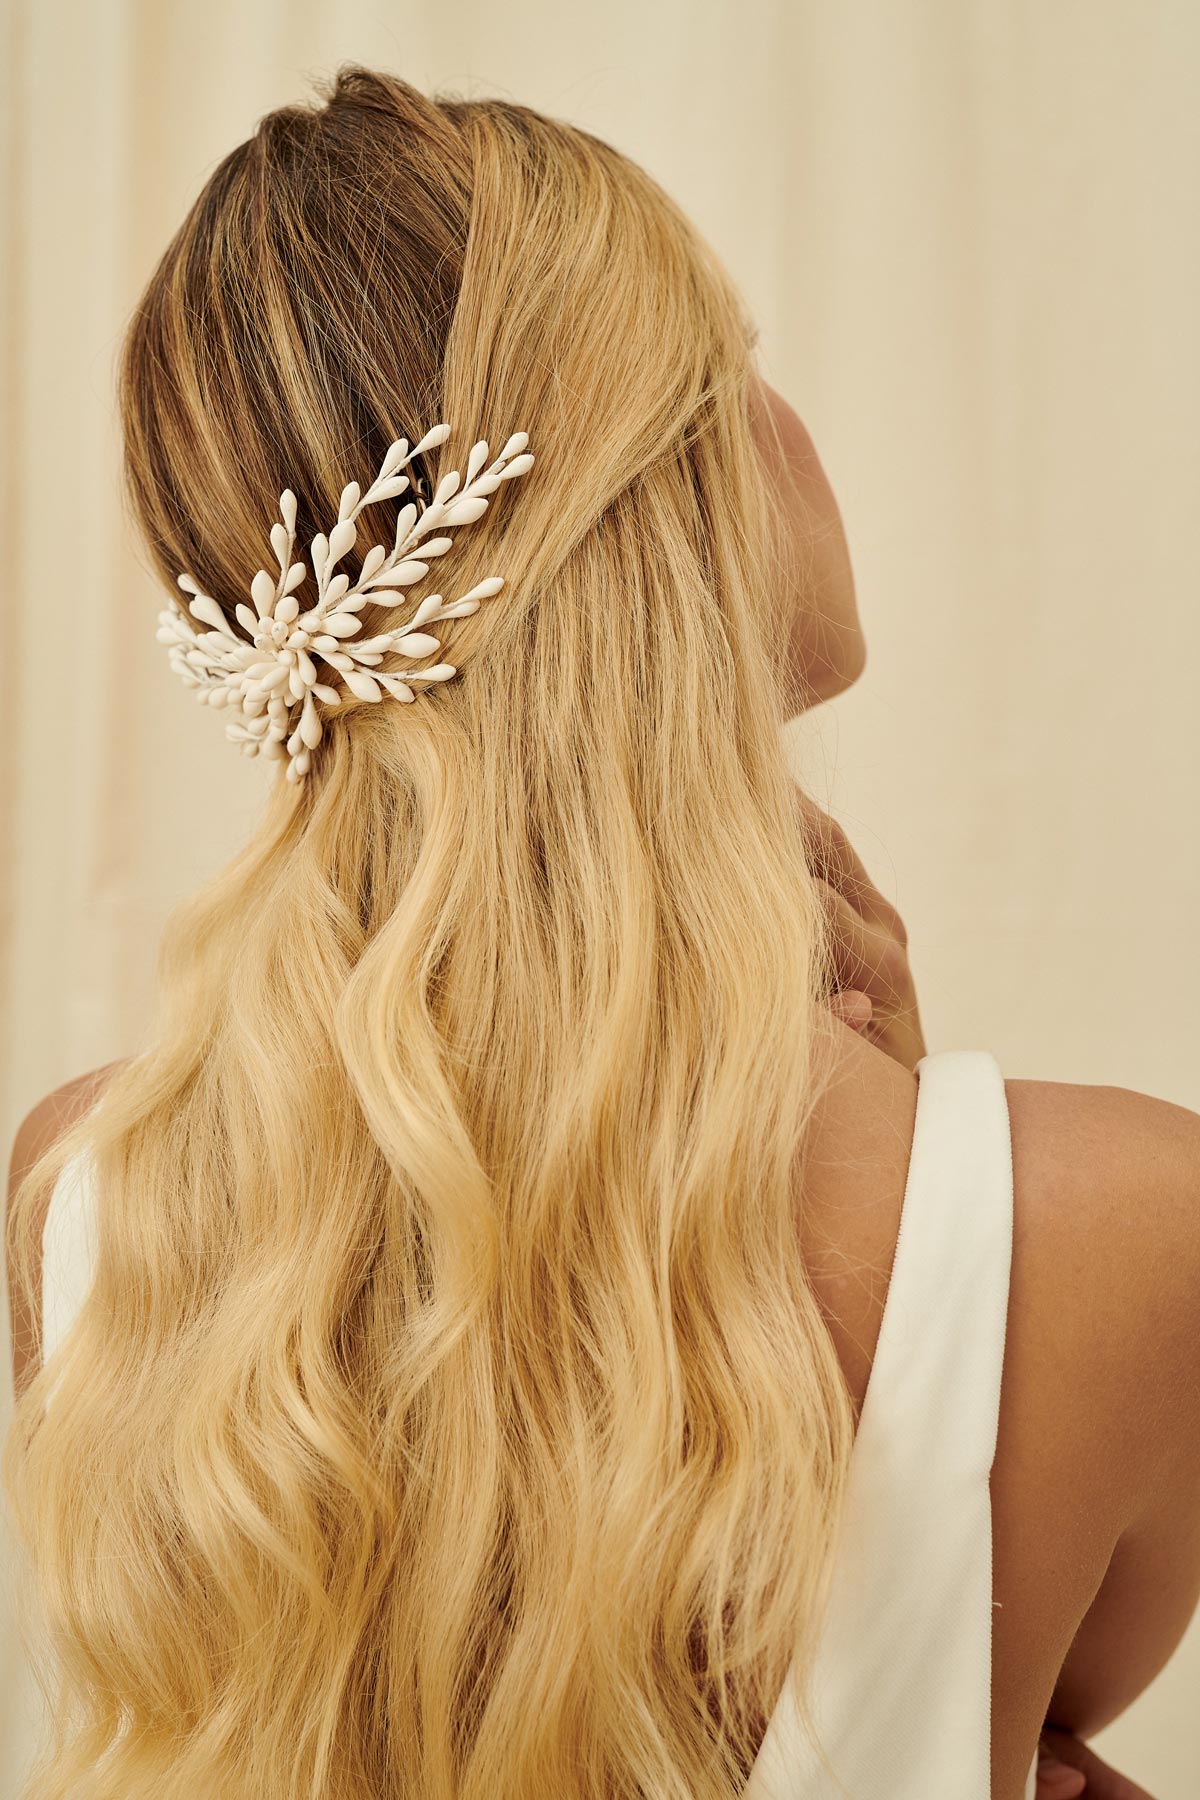 A delicate bridal hair accessory made from wax orange blossoms set into a comb